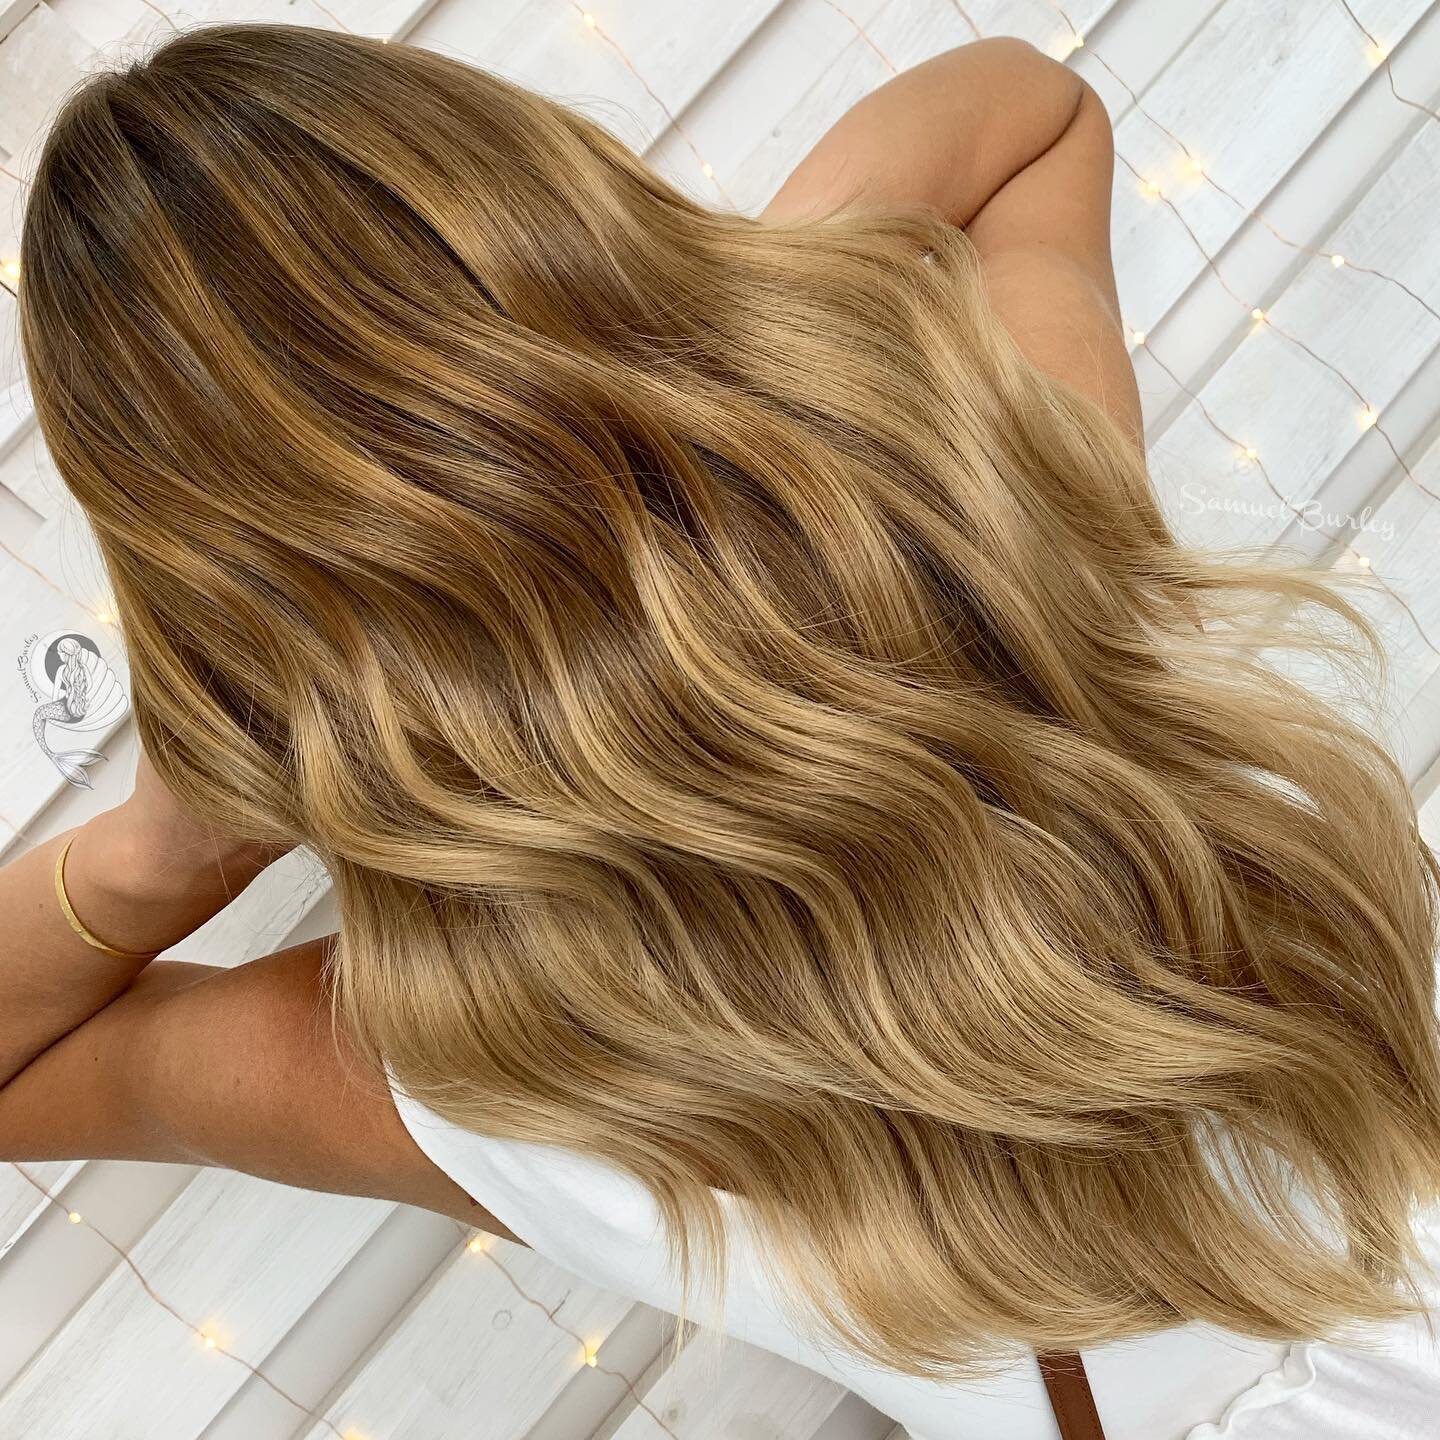 Surface painted balayage makes the softest melty colours. Working with warmth rather than fighting against it is a refreshing change and I am living for these honey ribbons 🍯